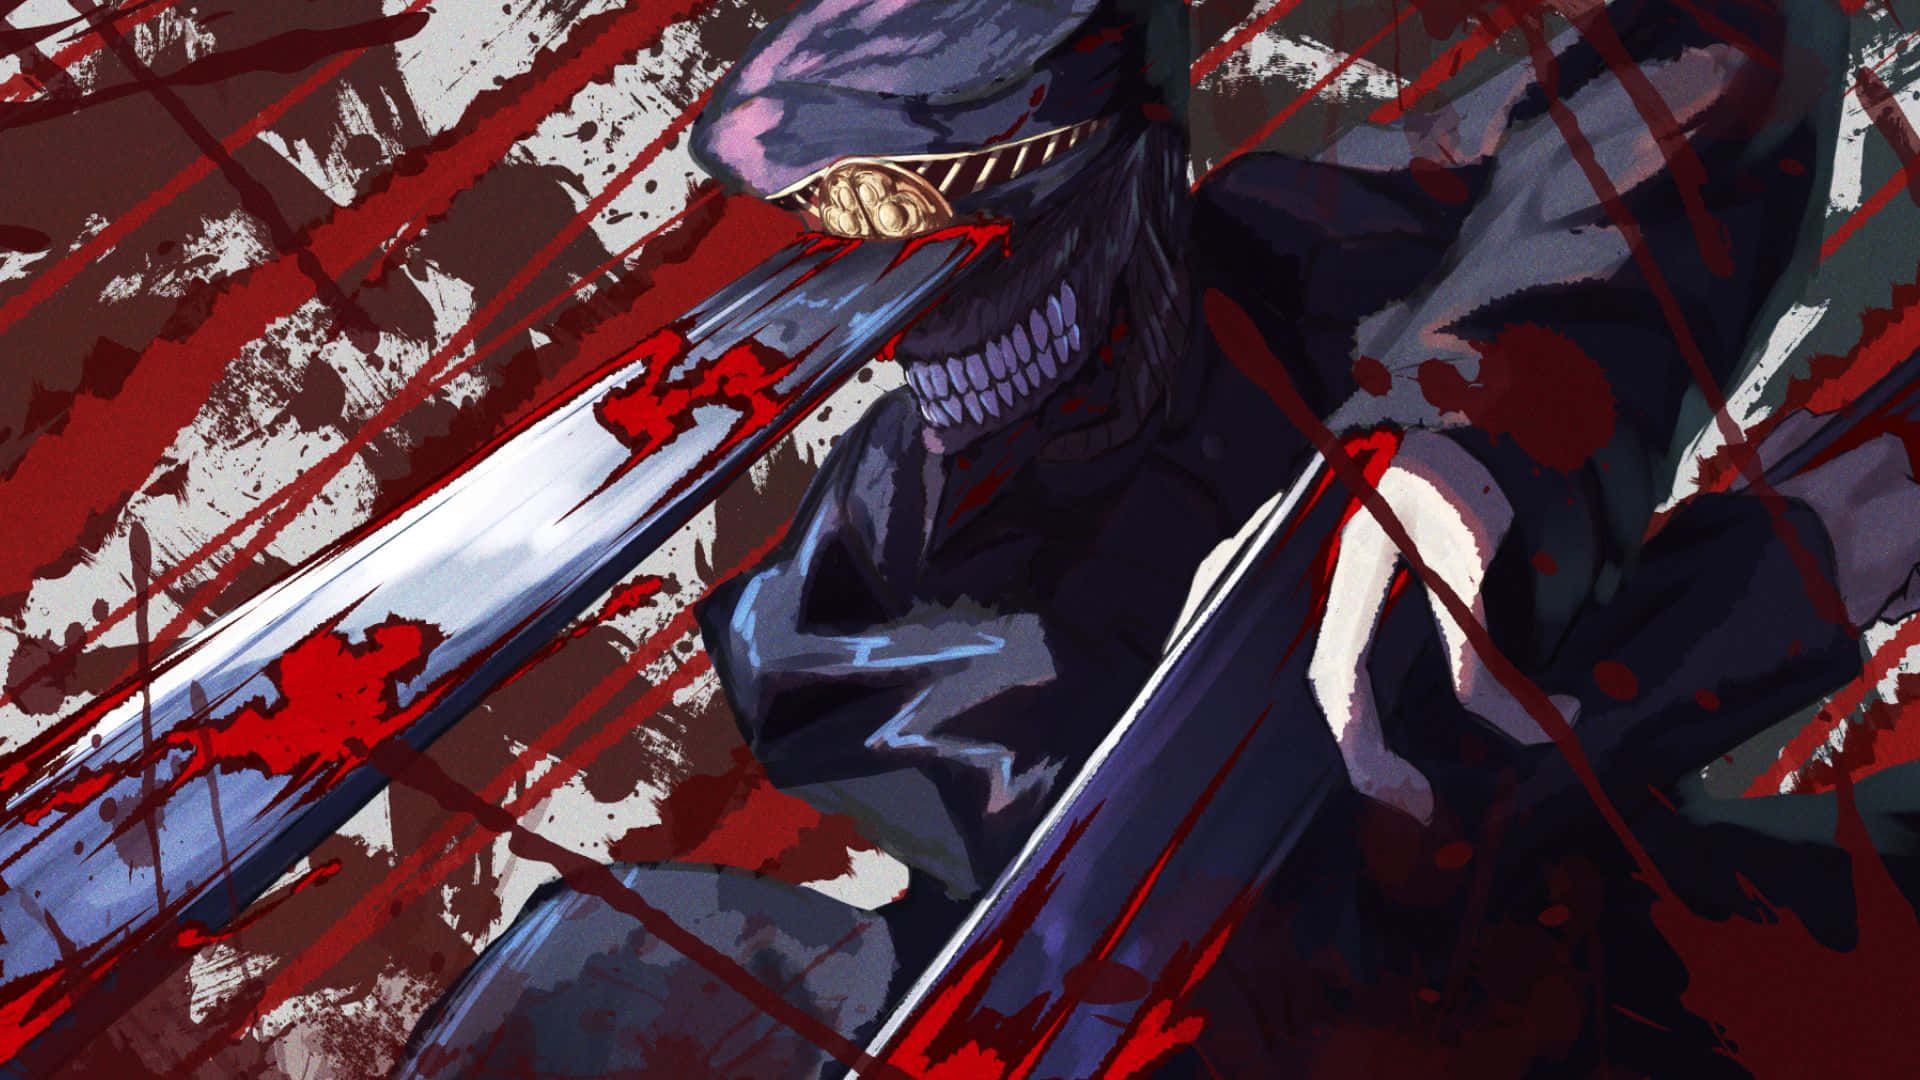 Chainsaw man  Chainsaw, Man wallpaper, Cool anime wallpapers